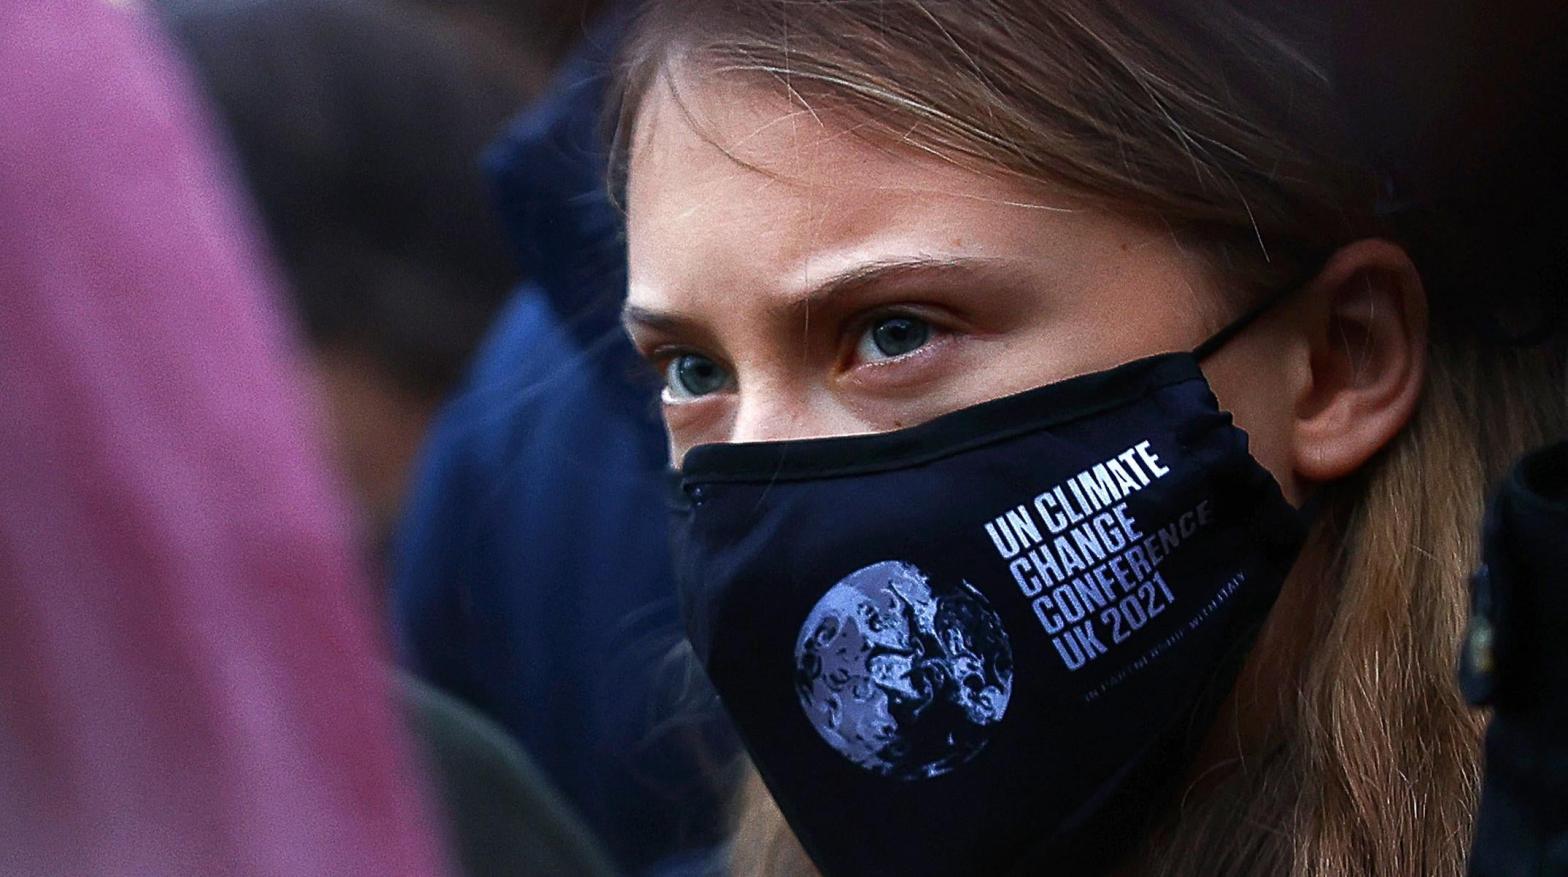 Swedish climate activist Greta Thunberg takes part in a protest in Glasgow. (Photo: Adrian Dennis/AFP, Getty Images)